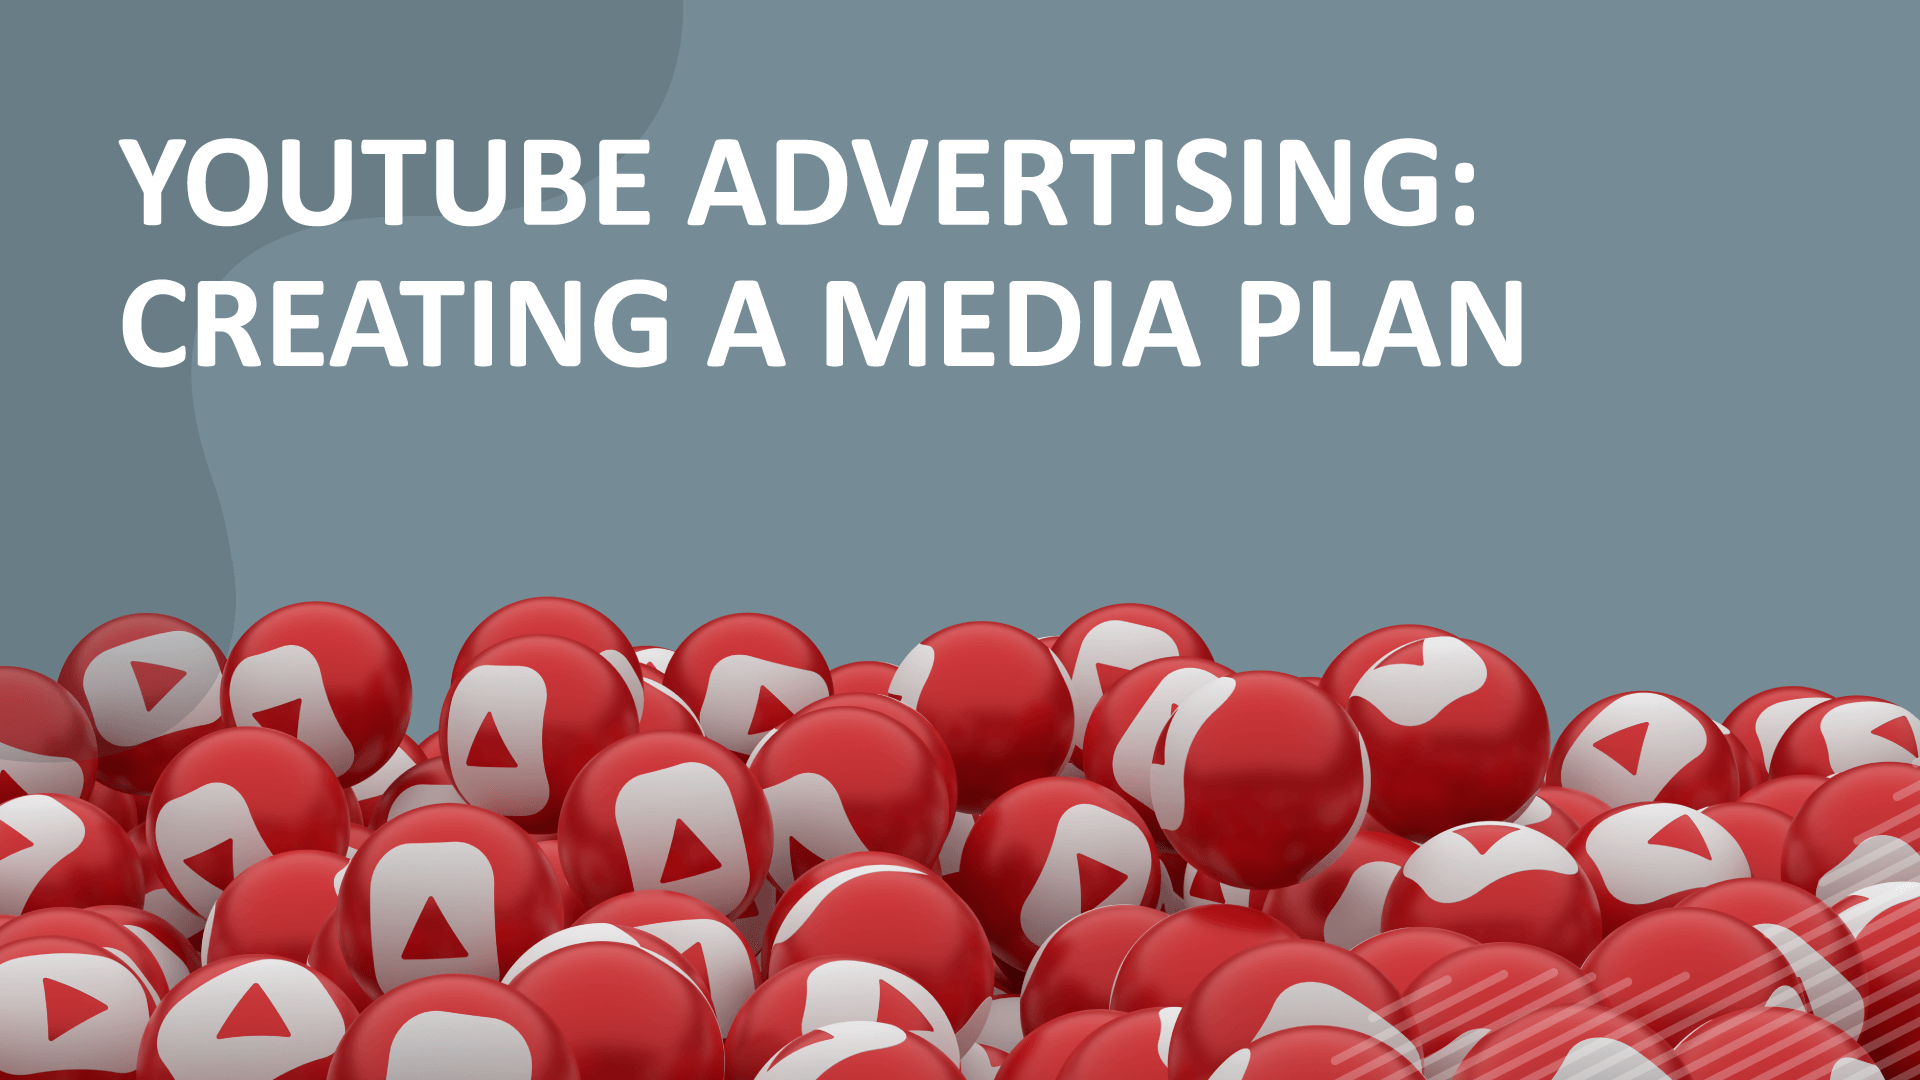 Advertising on YouTube: creating a media plan